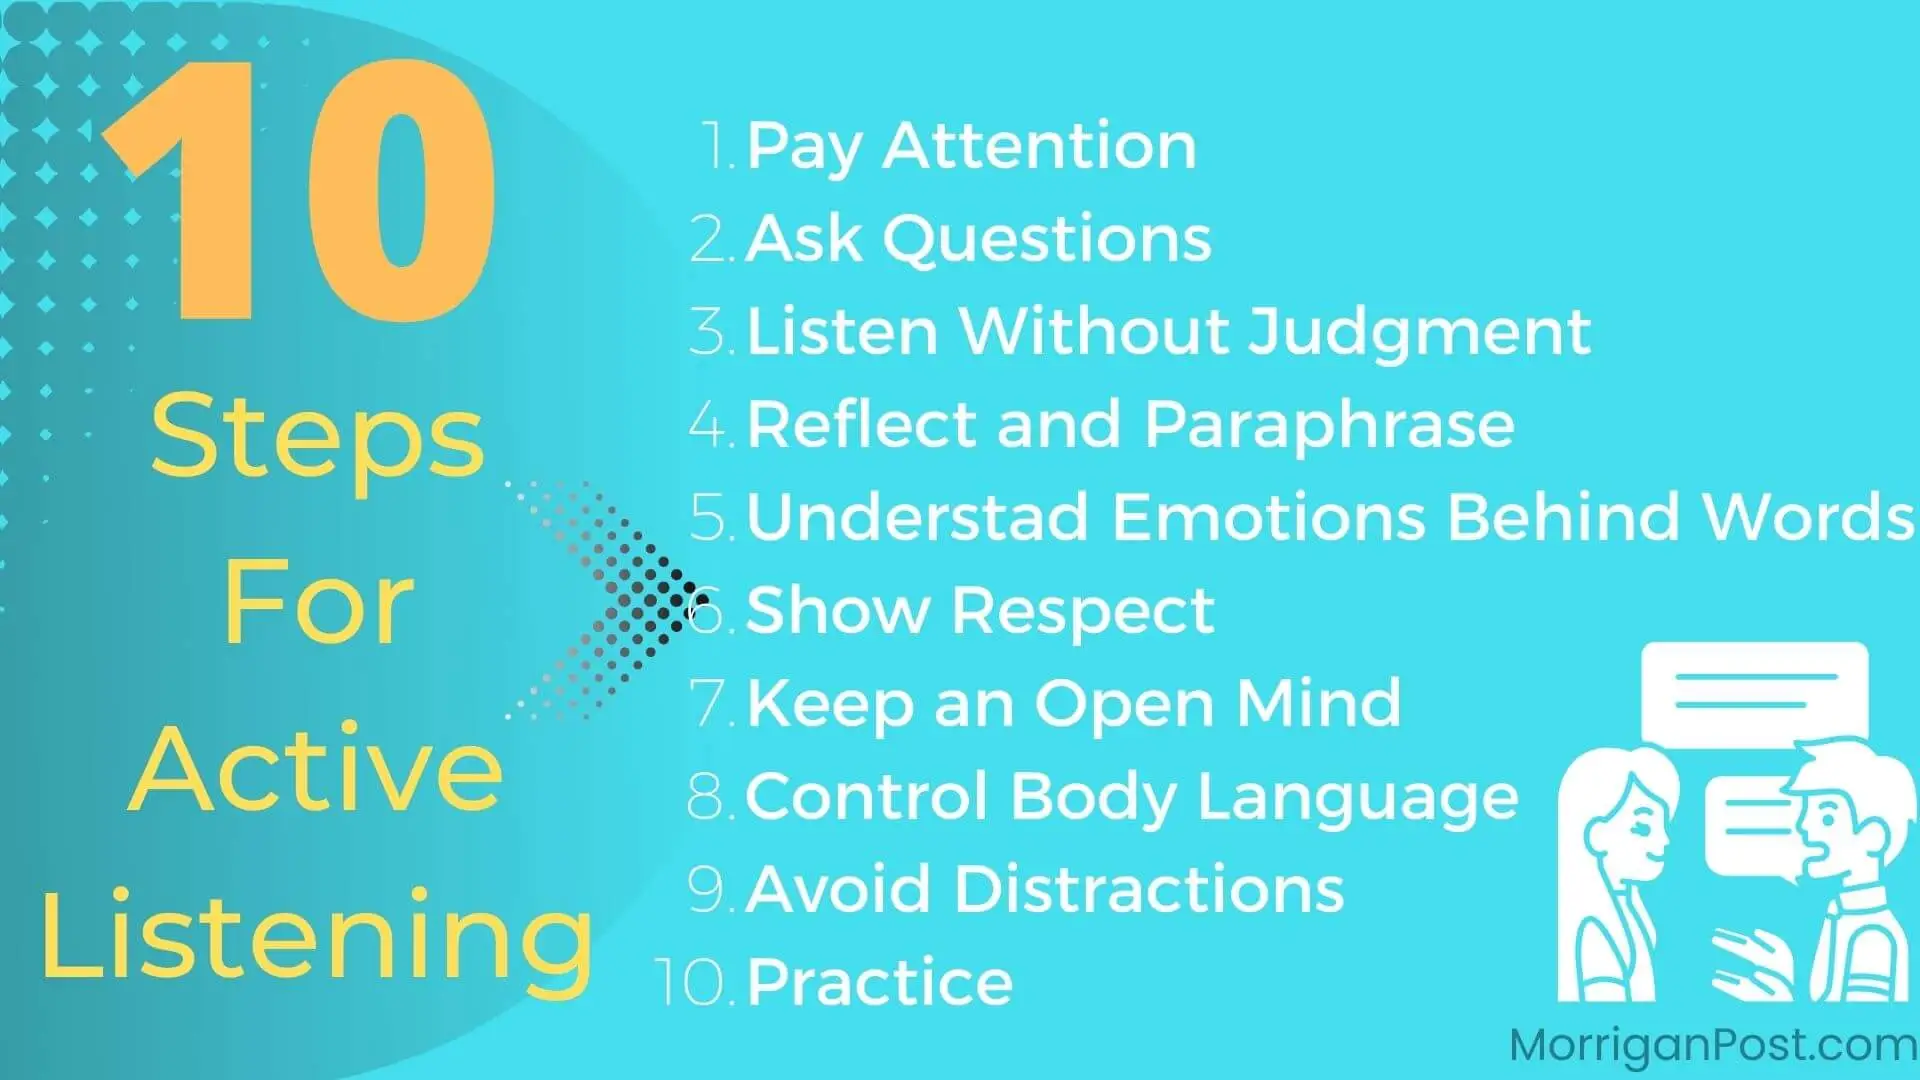 10 steps for active listening1